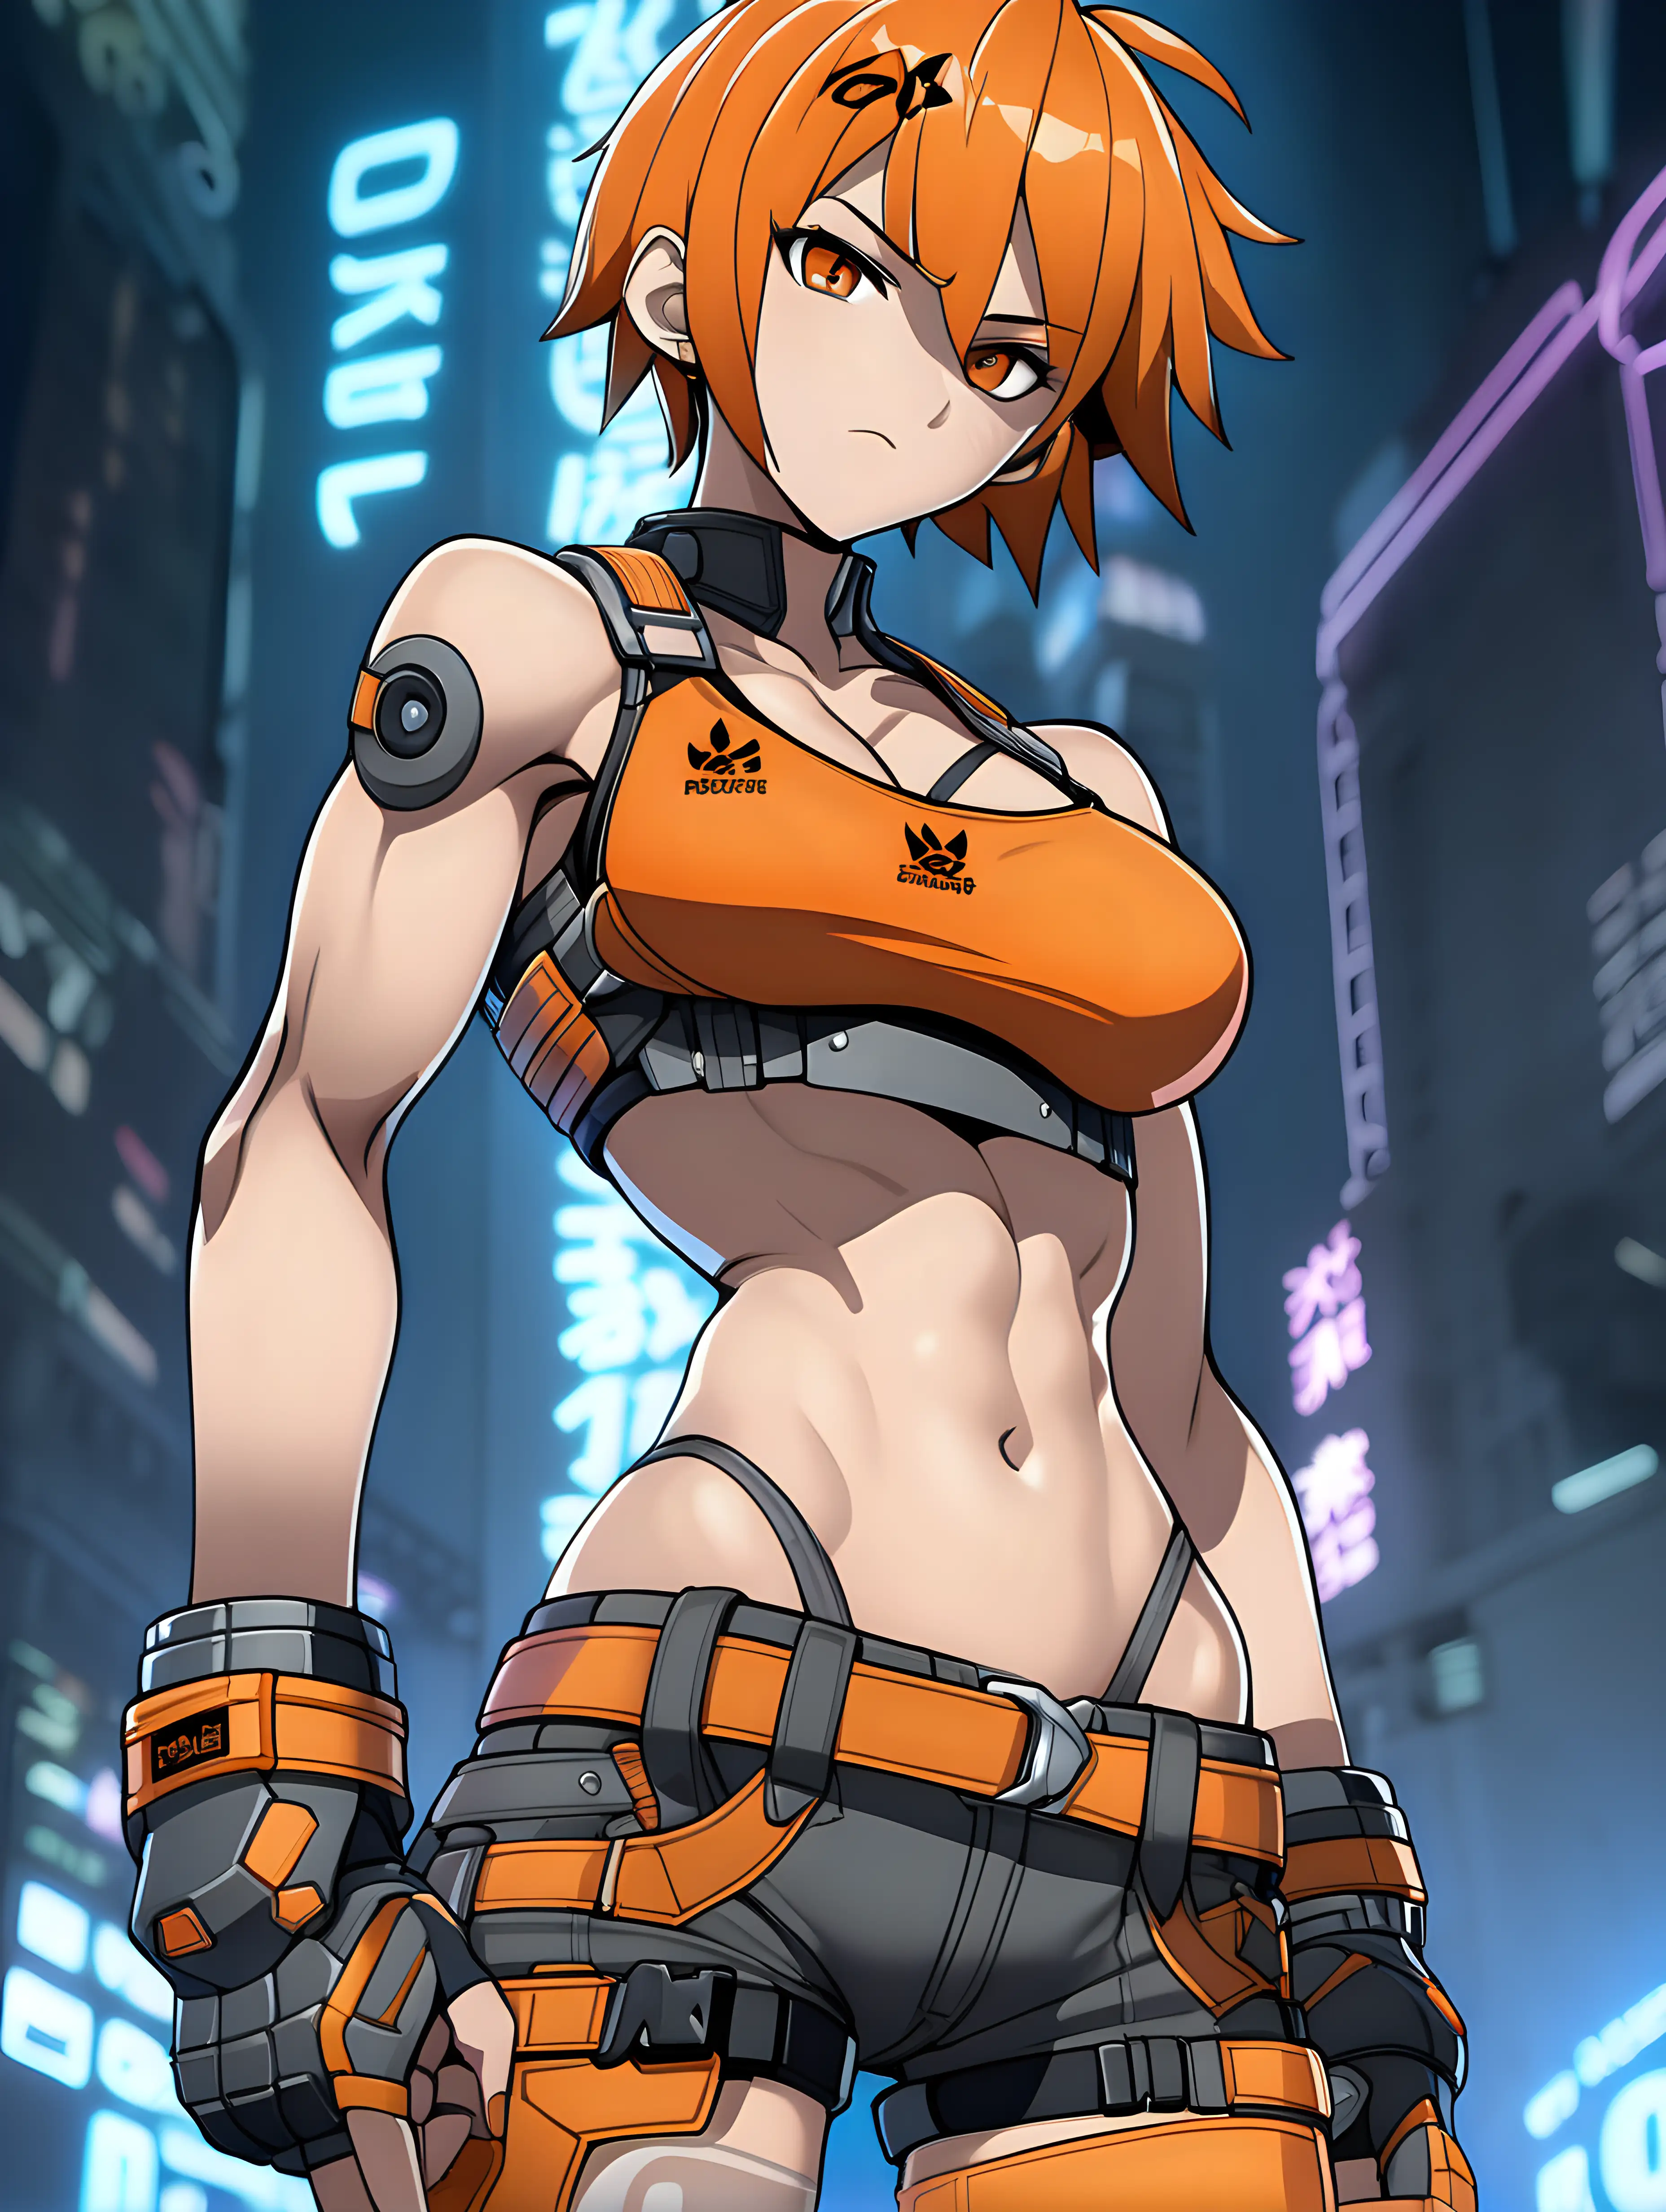 anime cyberpunk woman, tight bra top, exposed muscular midriff, mischievous expression, intimidating, tomboy, short hair, standing tall, dynamic pose, shadow aura, orange theme, partially armored, animated